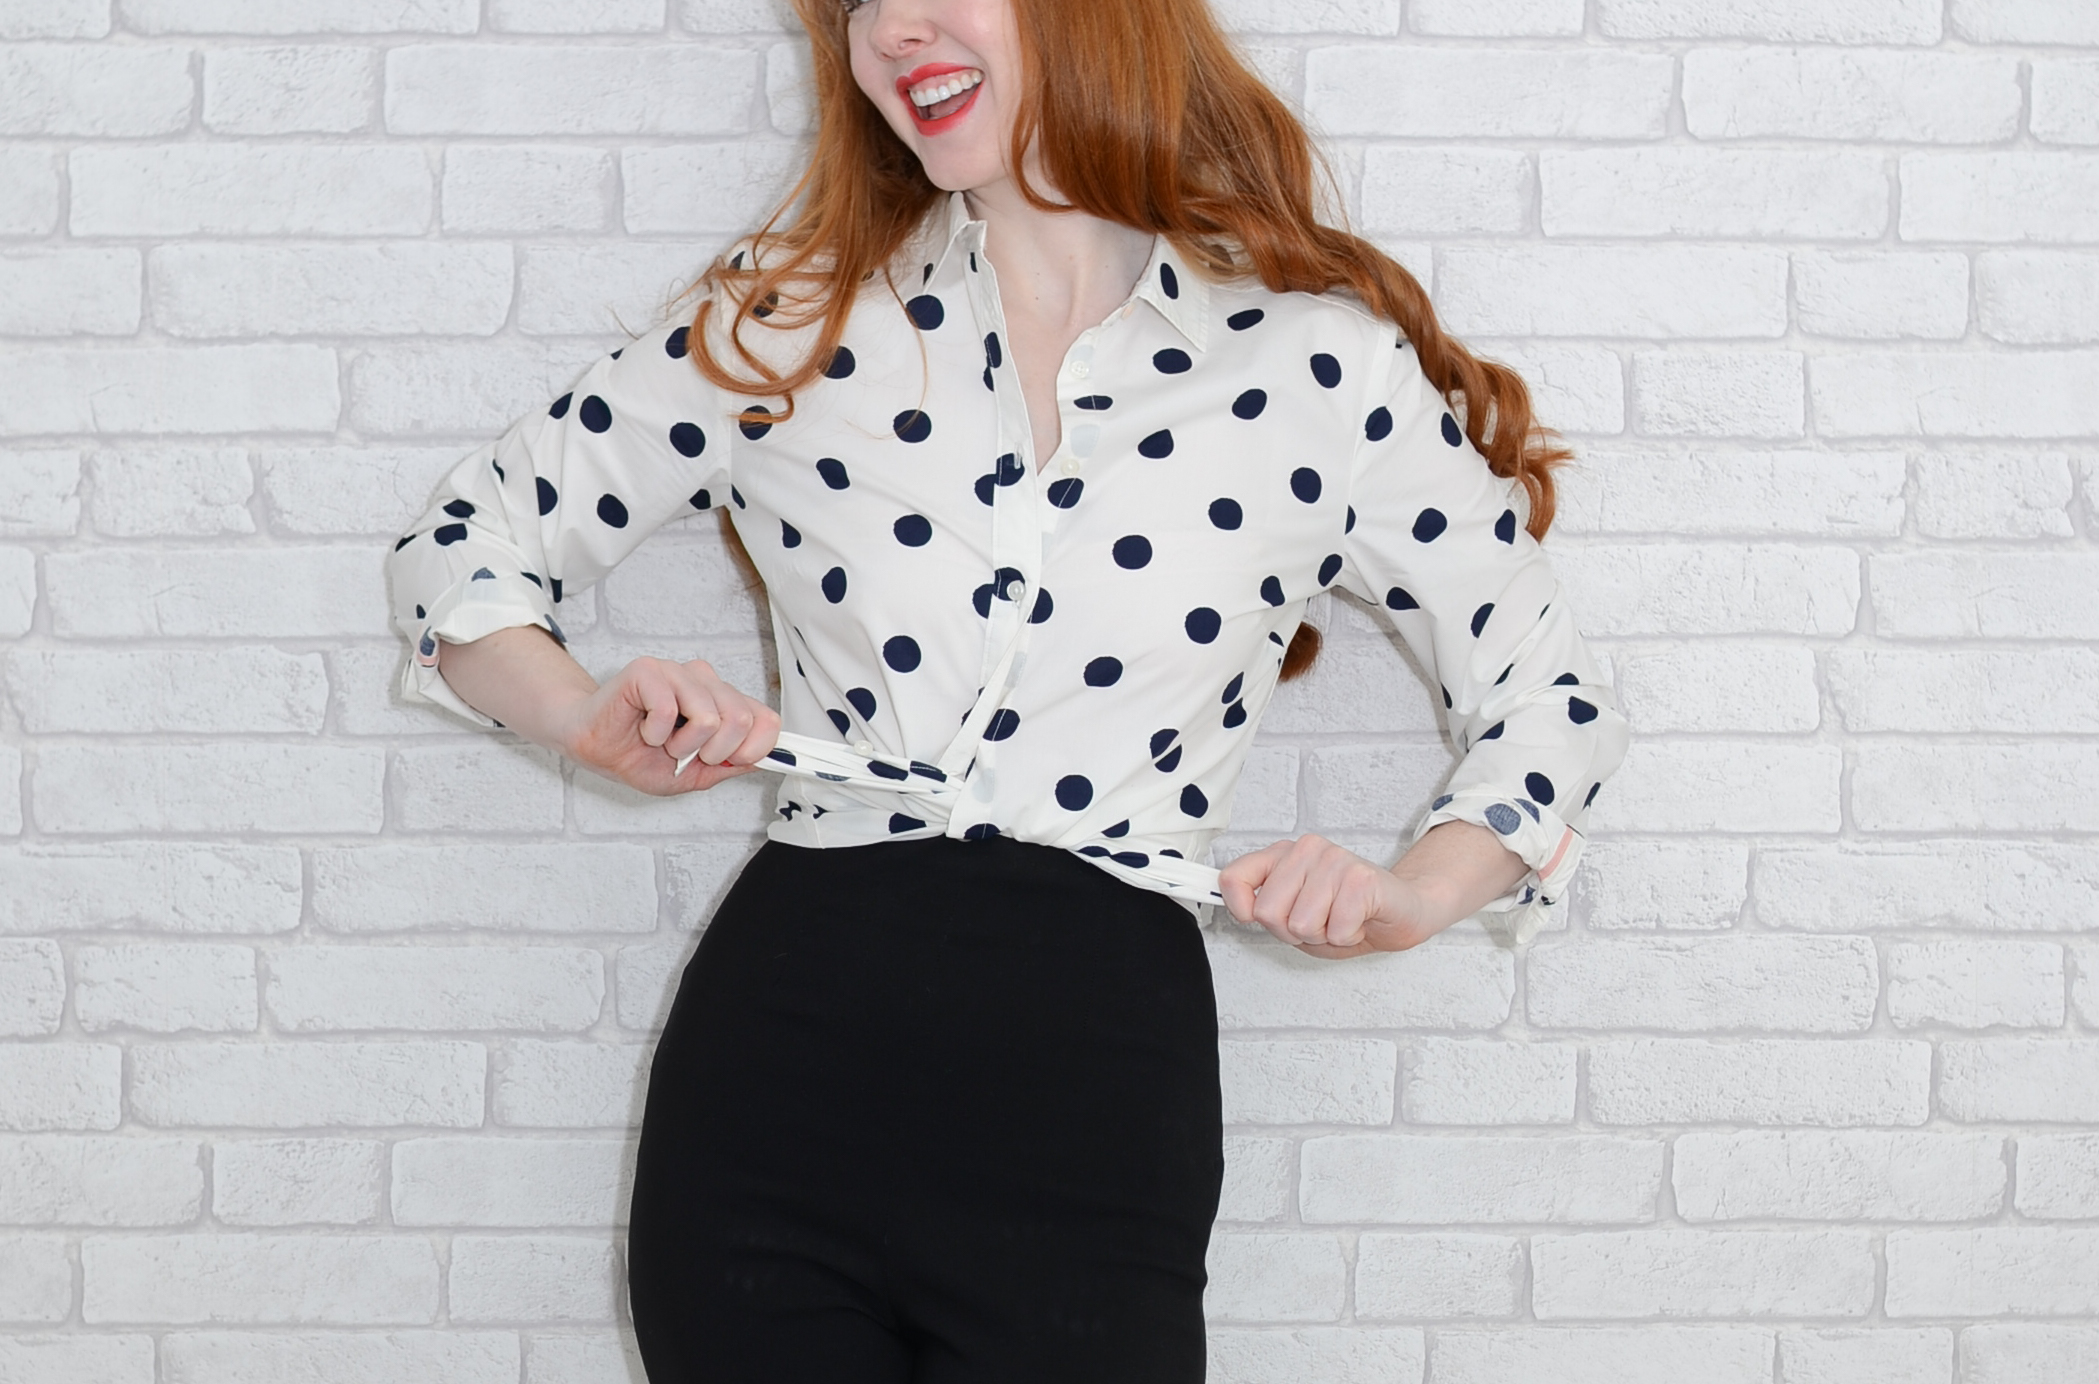 Boden classic shirt in ivory and navy spot - review